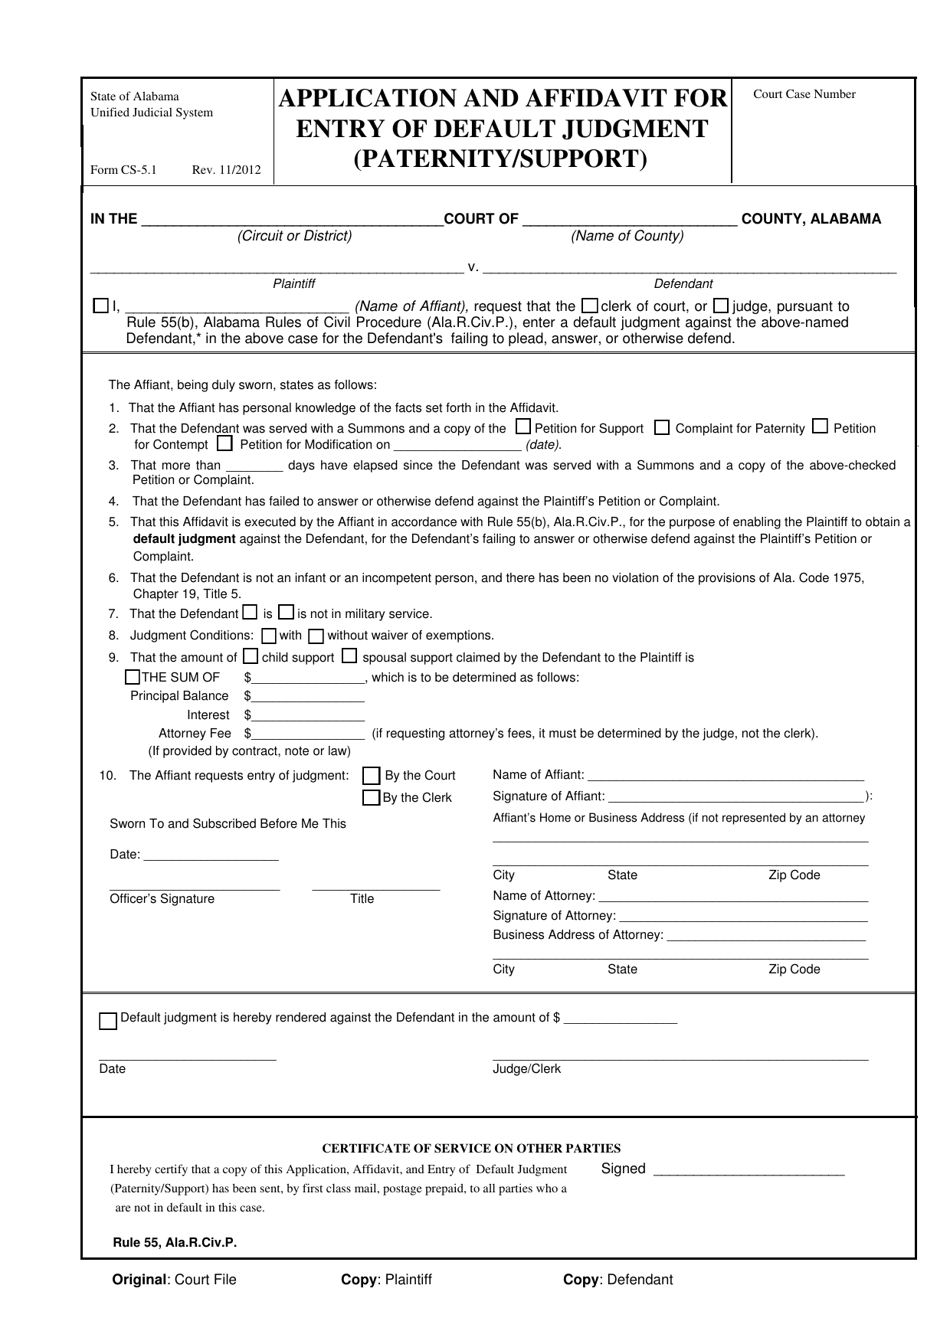 Form CS-5.1 Application and Affidavit for Entry of Default Judgment (Paternity / Support) - Alabama, Page 1